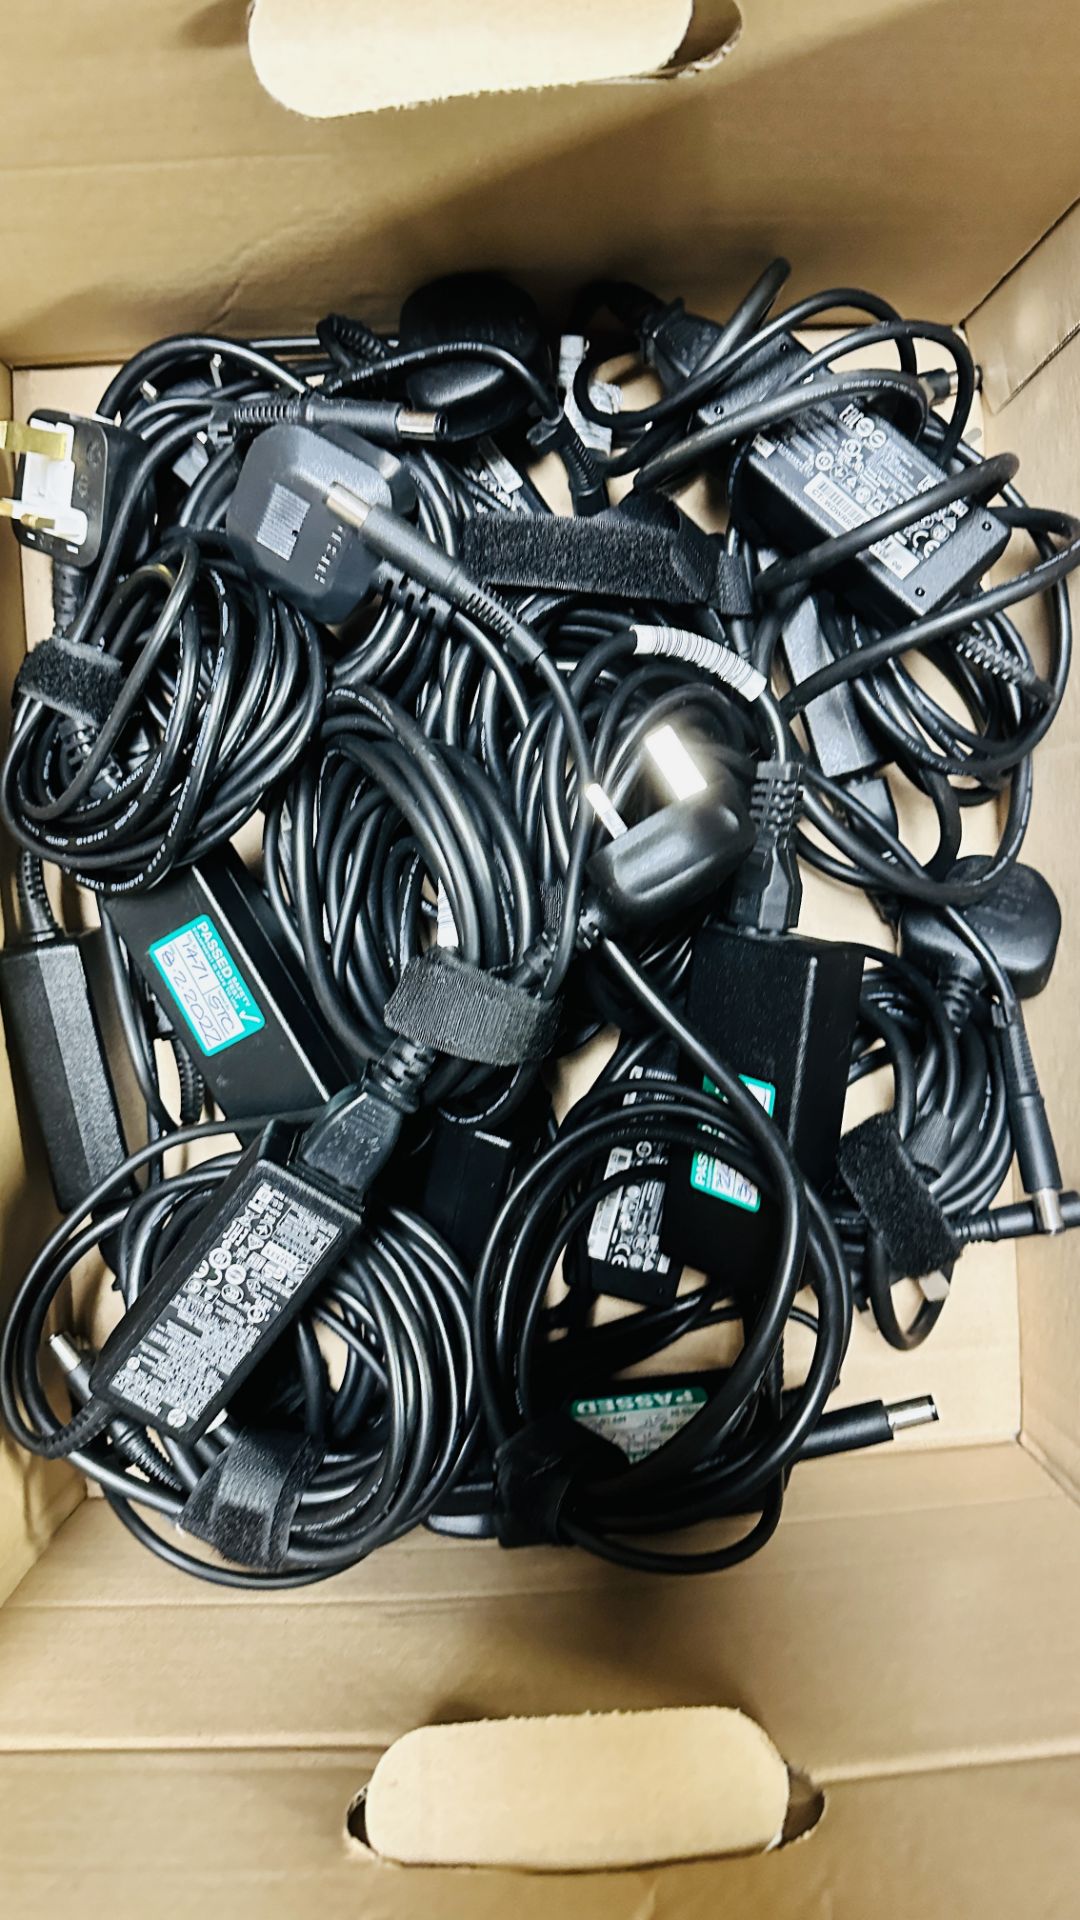 36 X LAPTOP CHARGERS FOR HP LAPTOPS MANY HP 65W AND 45W EXAMPLES - SOLD AS SEEN. - Image 2 of 9